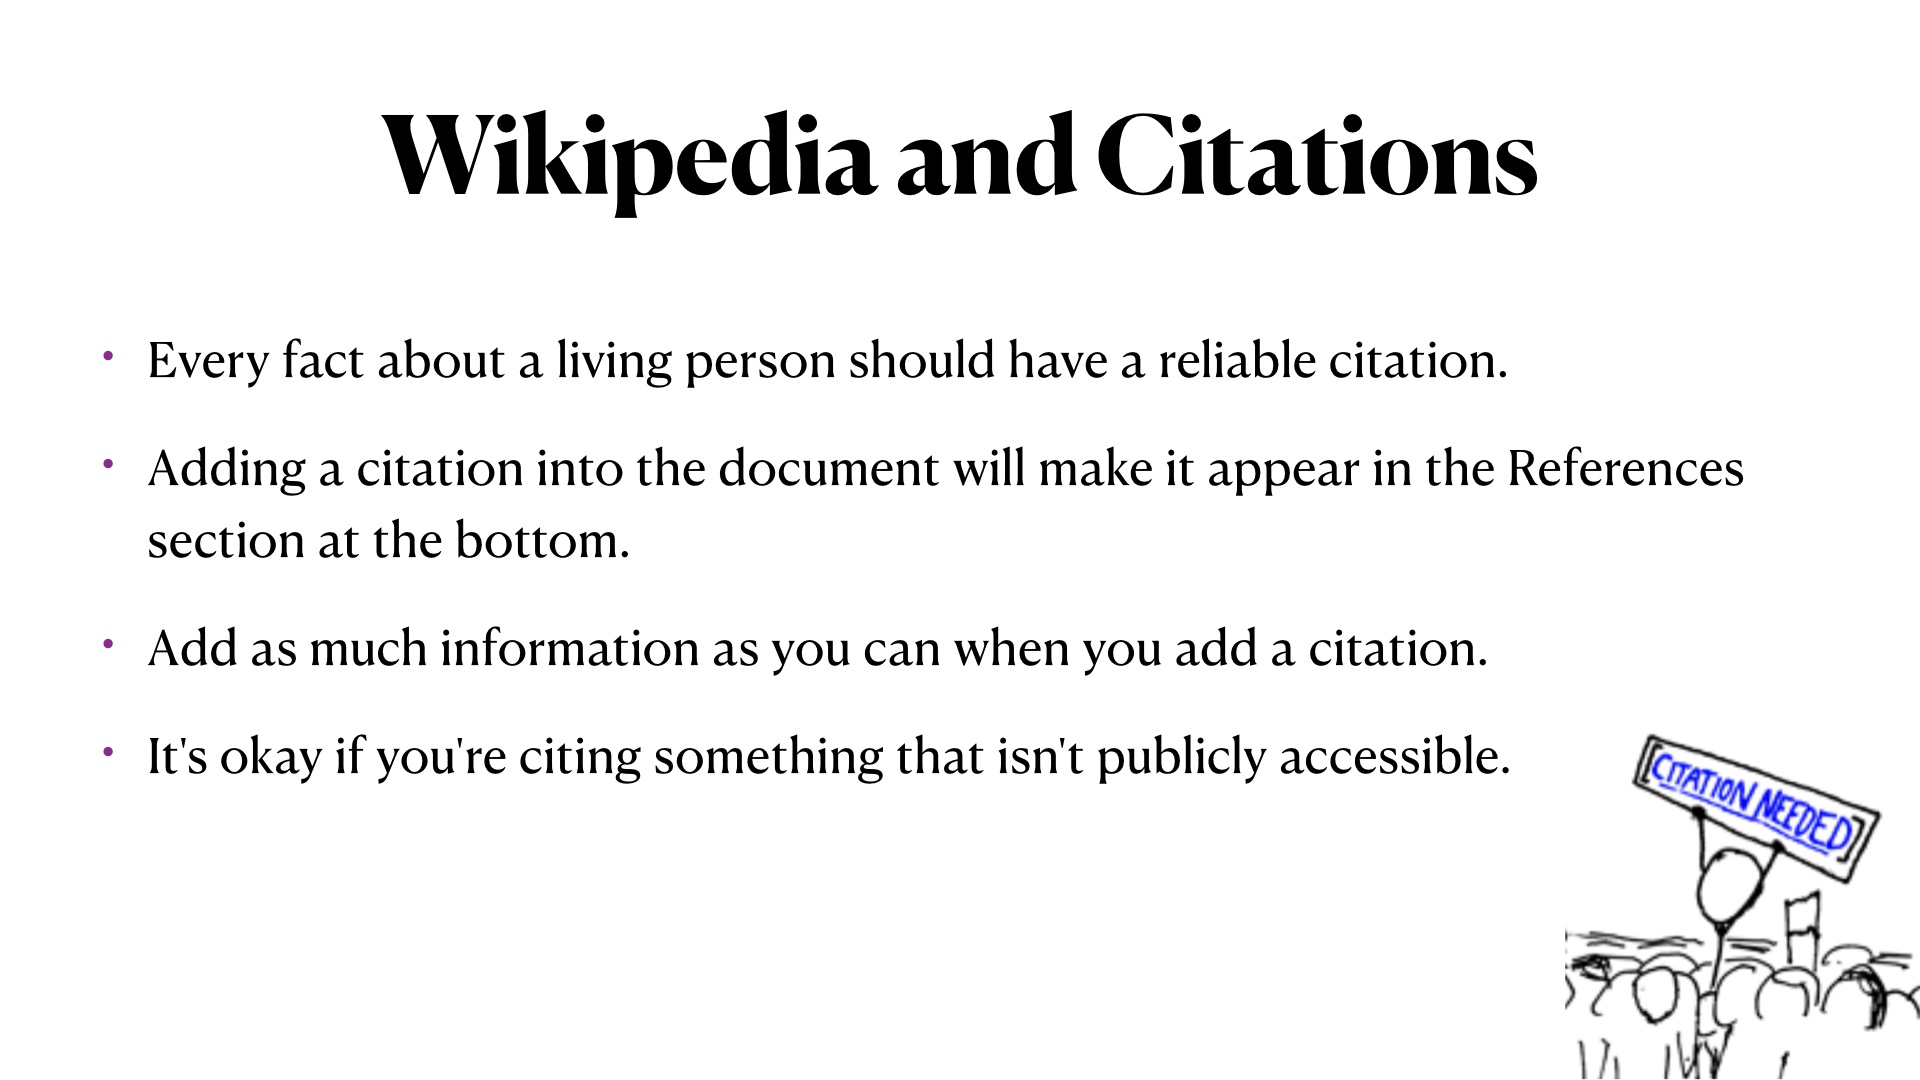 Wikipedia and Citations: Every fact about a living person should have a reliable citation.
Adding a citation into the document will make it appear in the References section at the bottom.
Add as much information as you can when you add a citation.
It's okay if you're citing something that isn't publicly accessible.